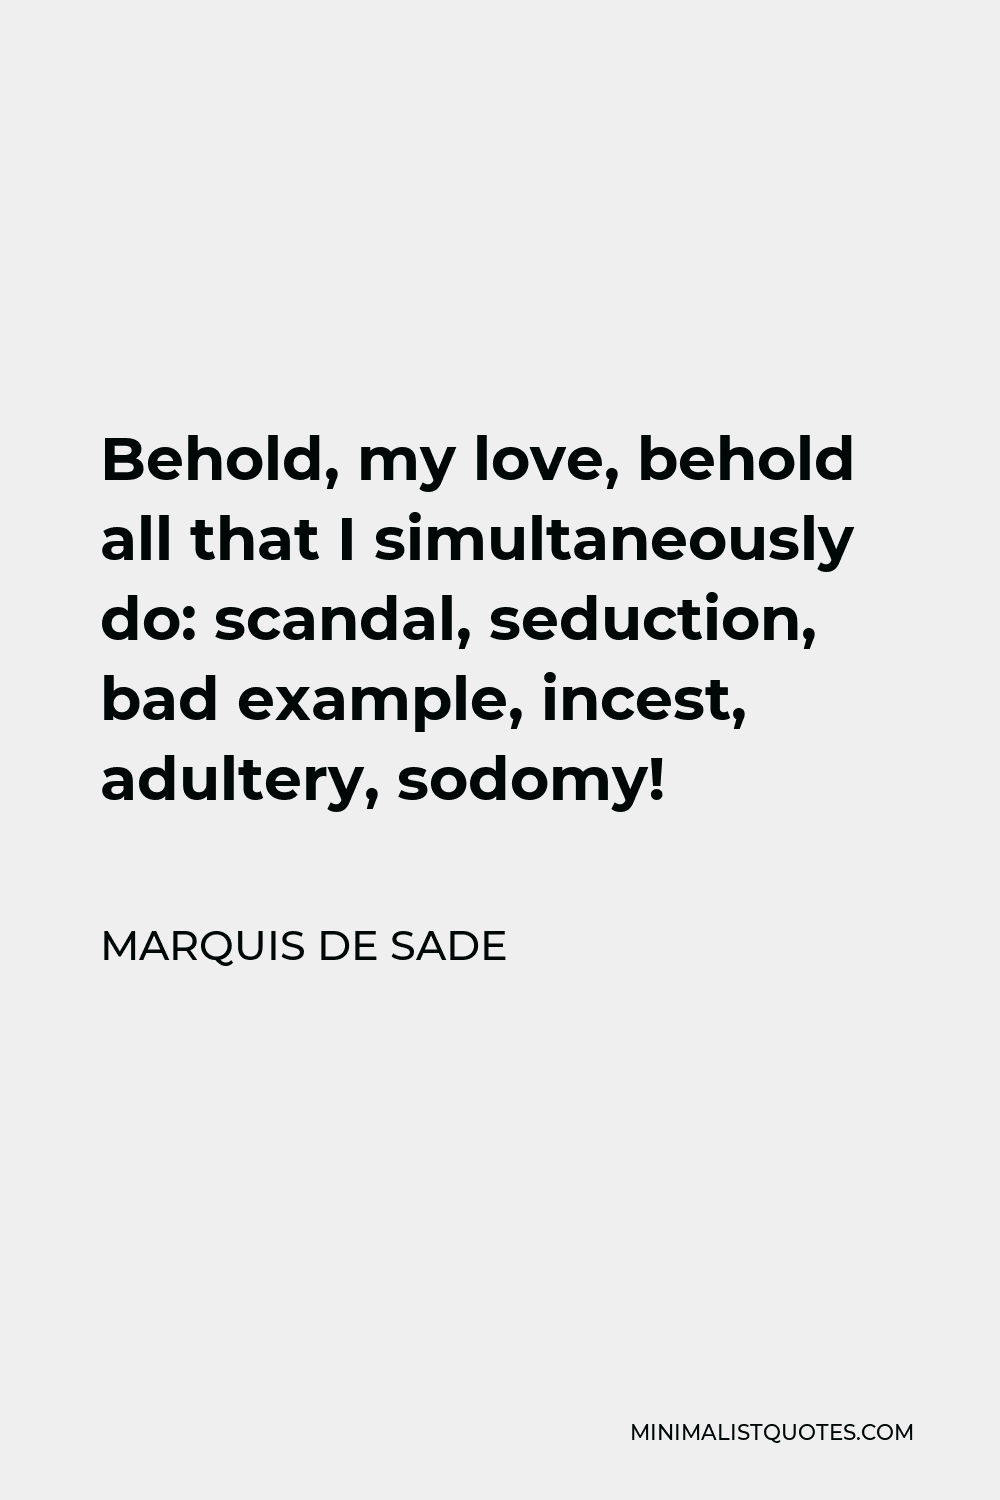 Marquis de Sade Quote - Behold, my love, behold all that I simultaneously do: scandal, seduction, bad example, incest, adultery, sodomy!